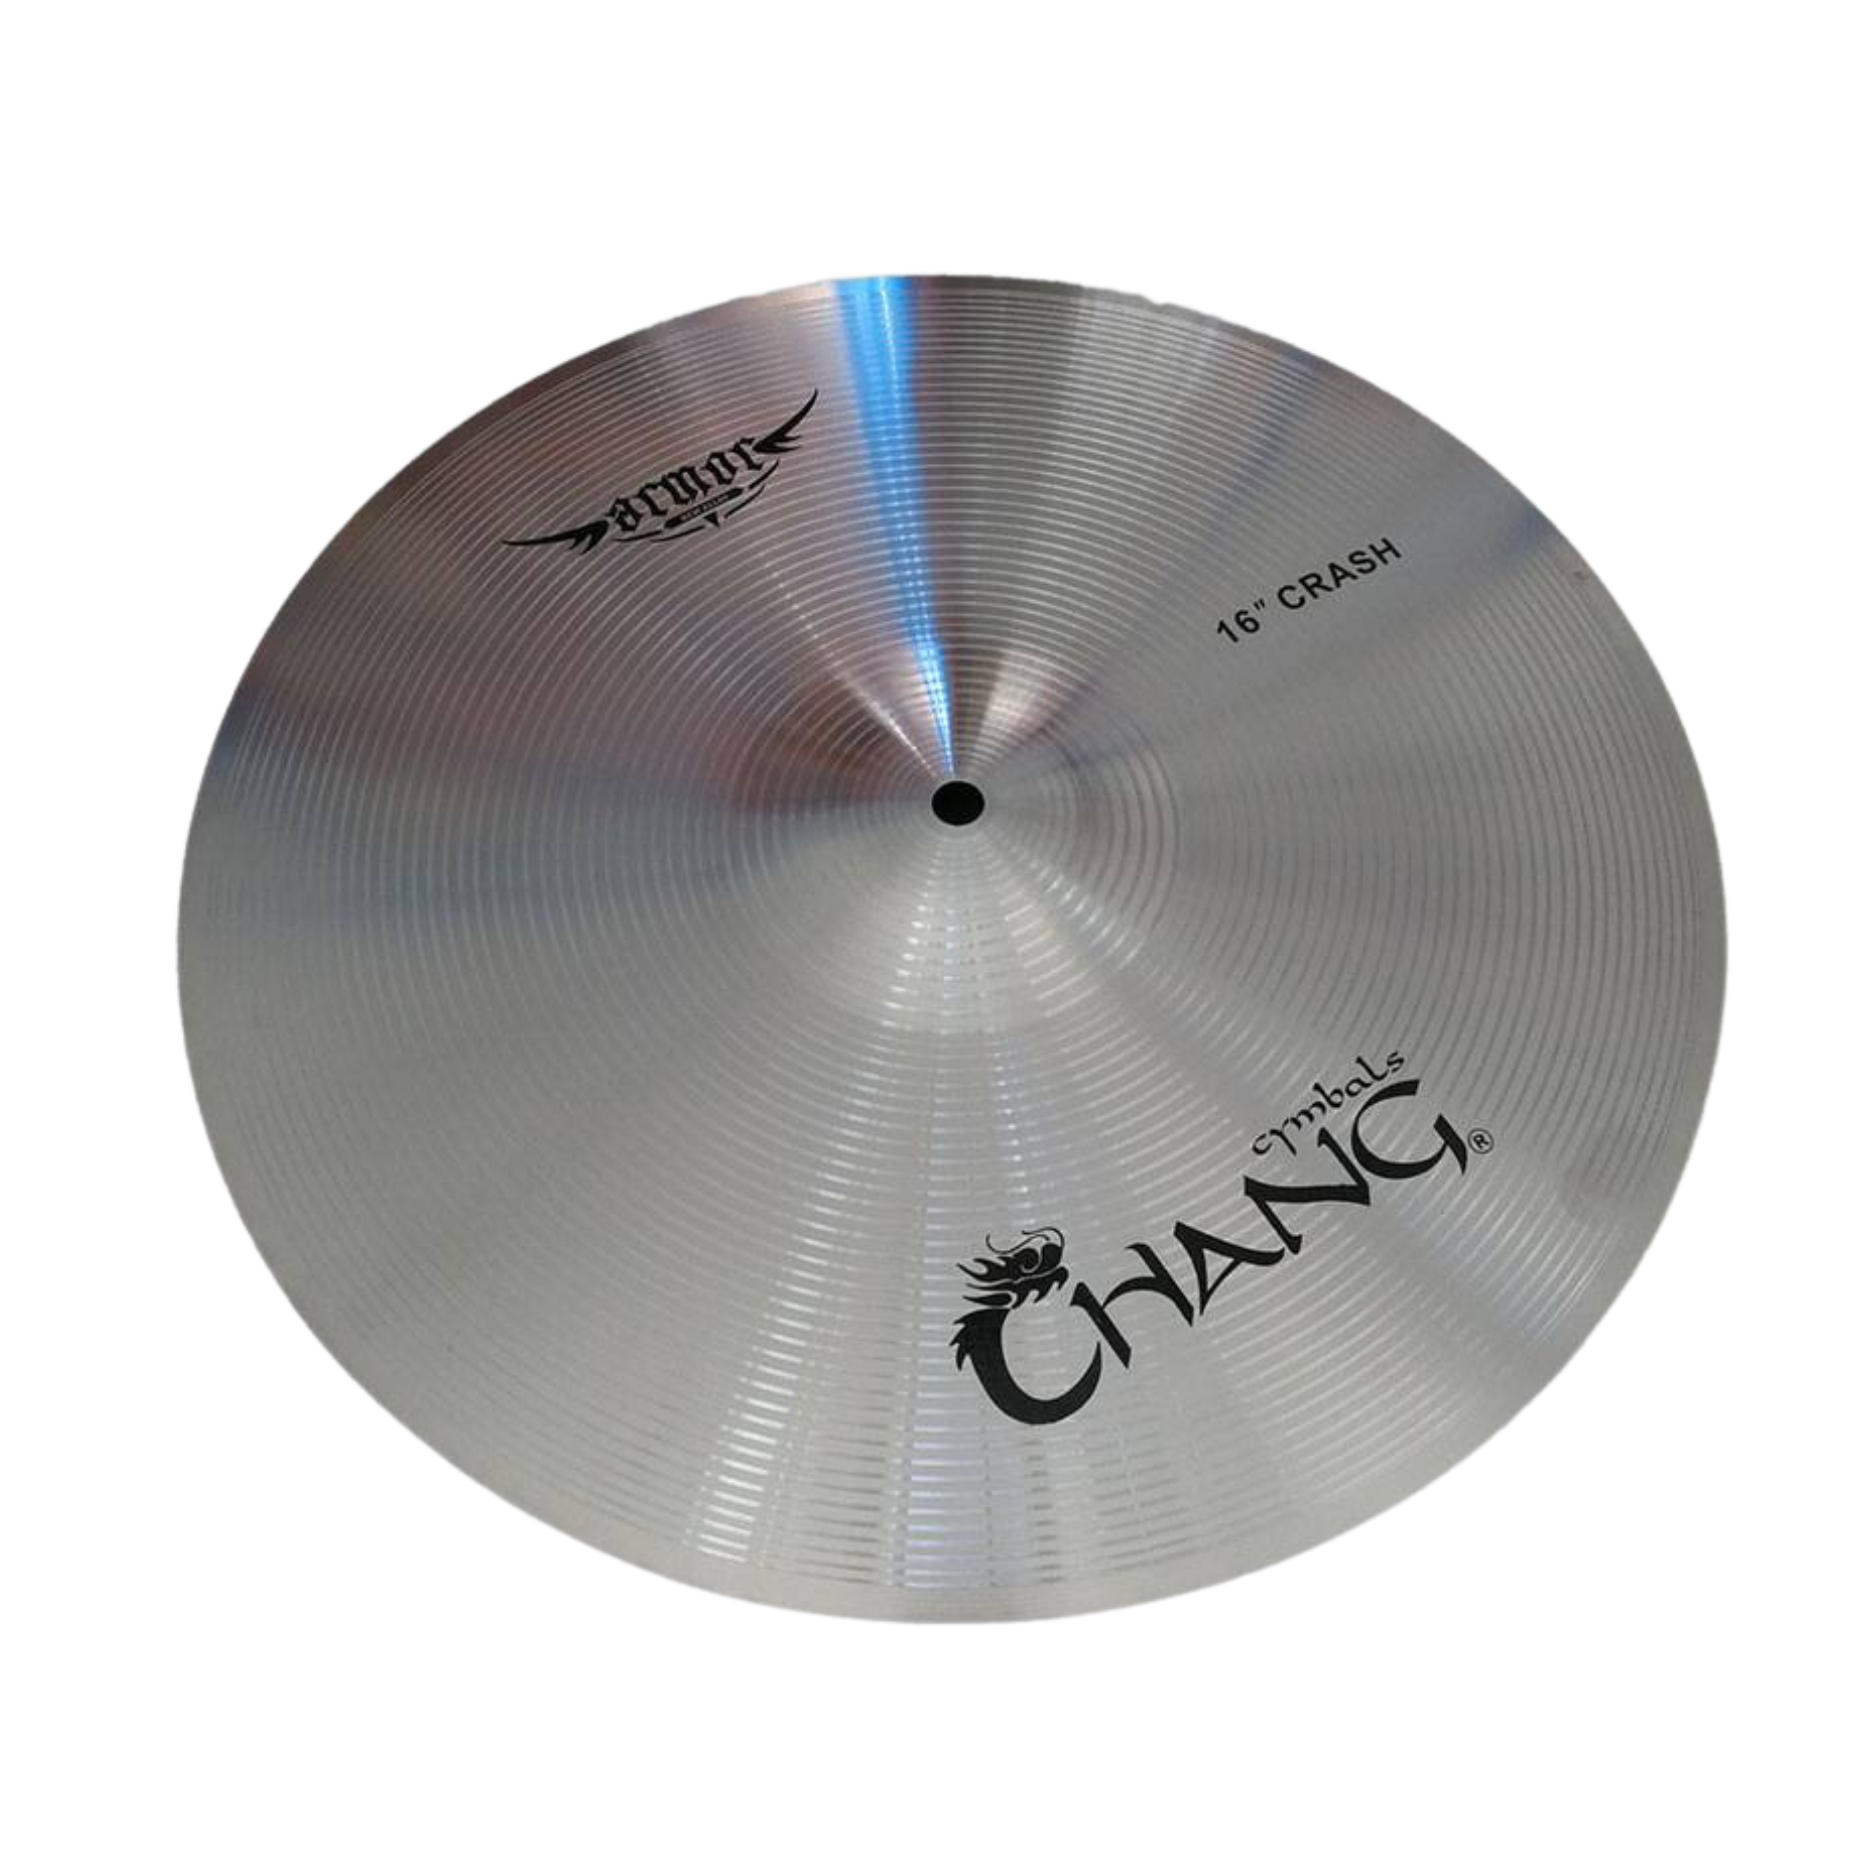 CHANG AR-16C CRASH CYMBAL 16 INCHES SIZE SILVER COLOR